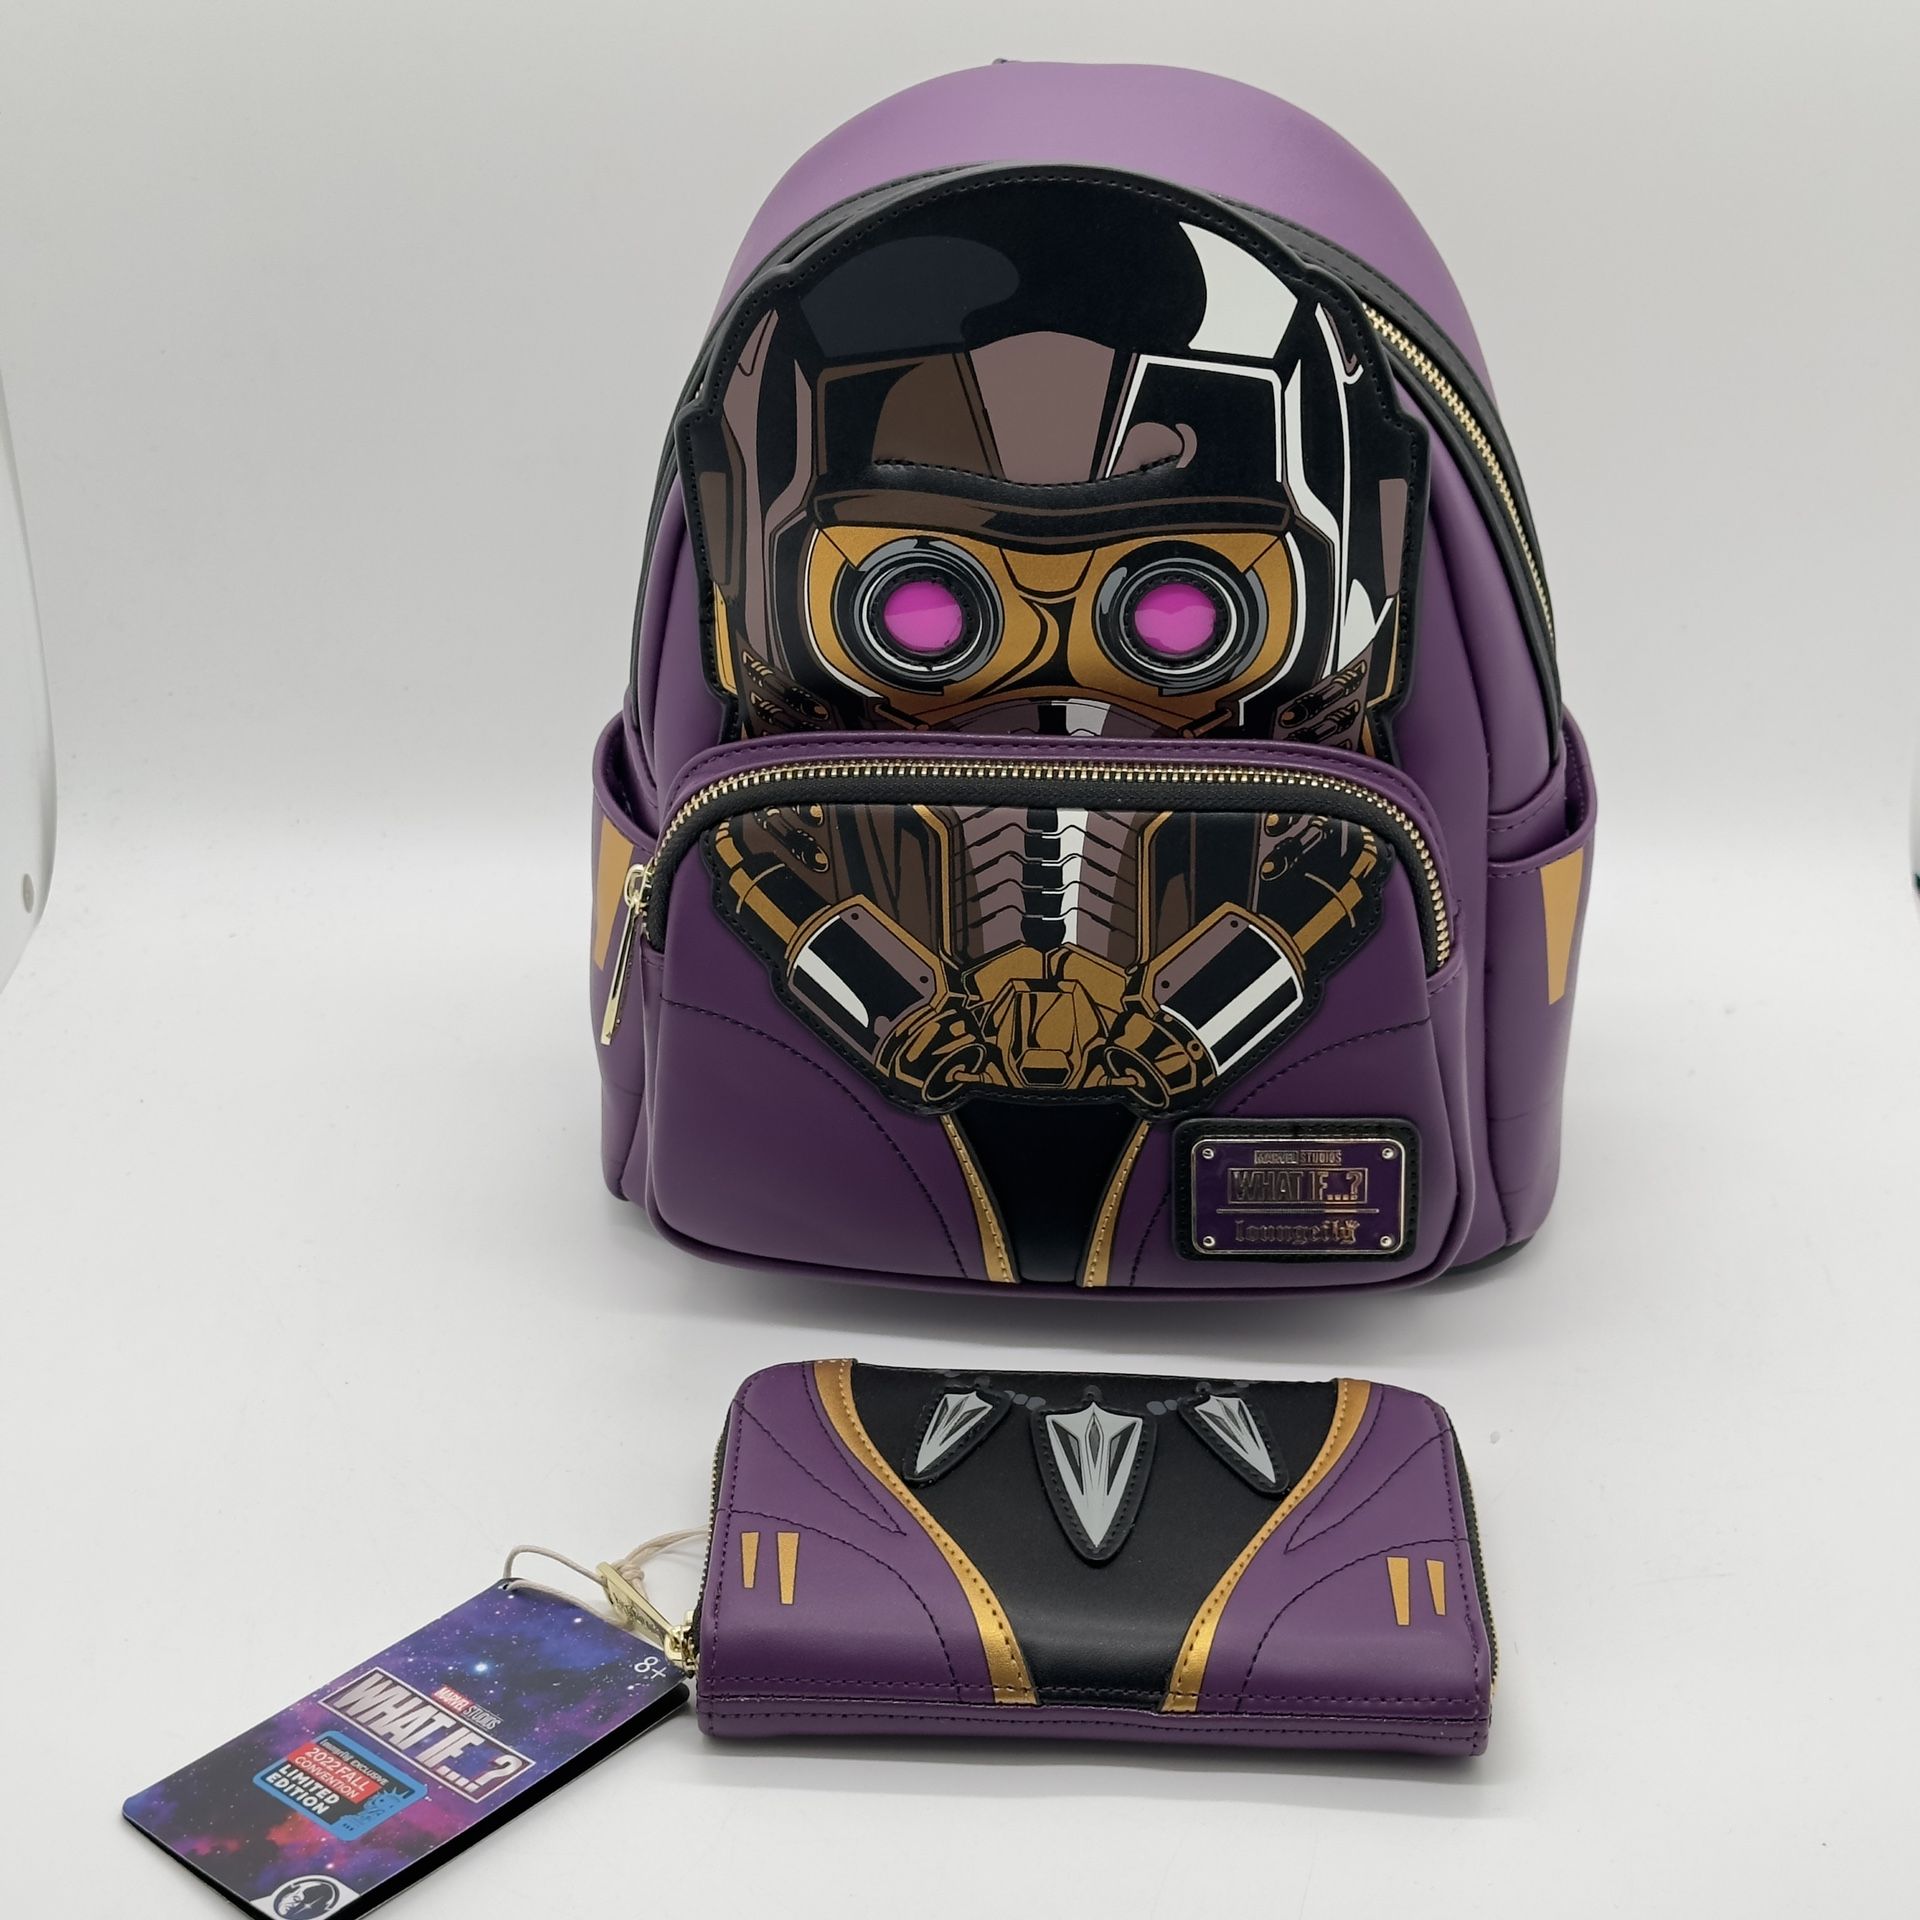 Loungefly x Marvel Studios What If? Star Lord T’ Challa Backpack&Wallet Backpack